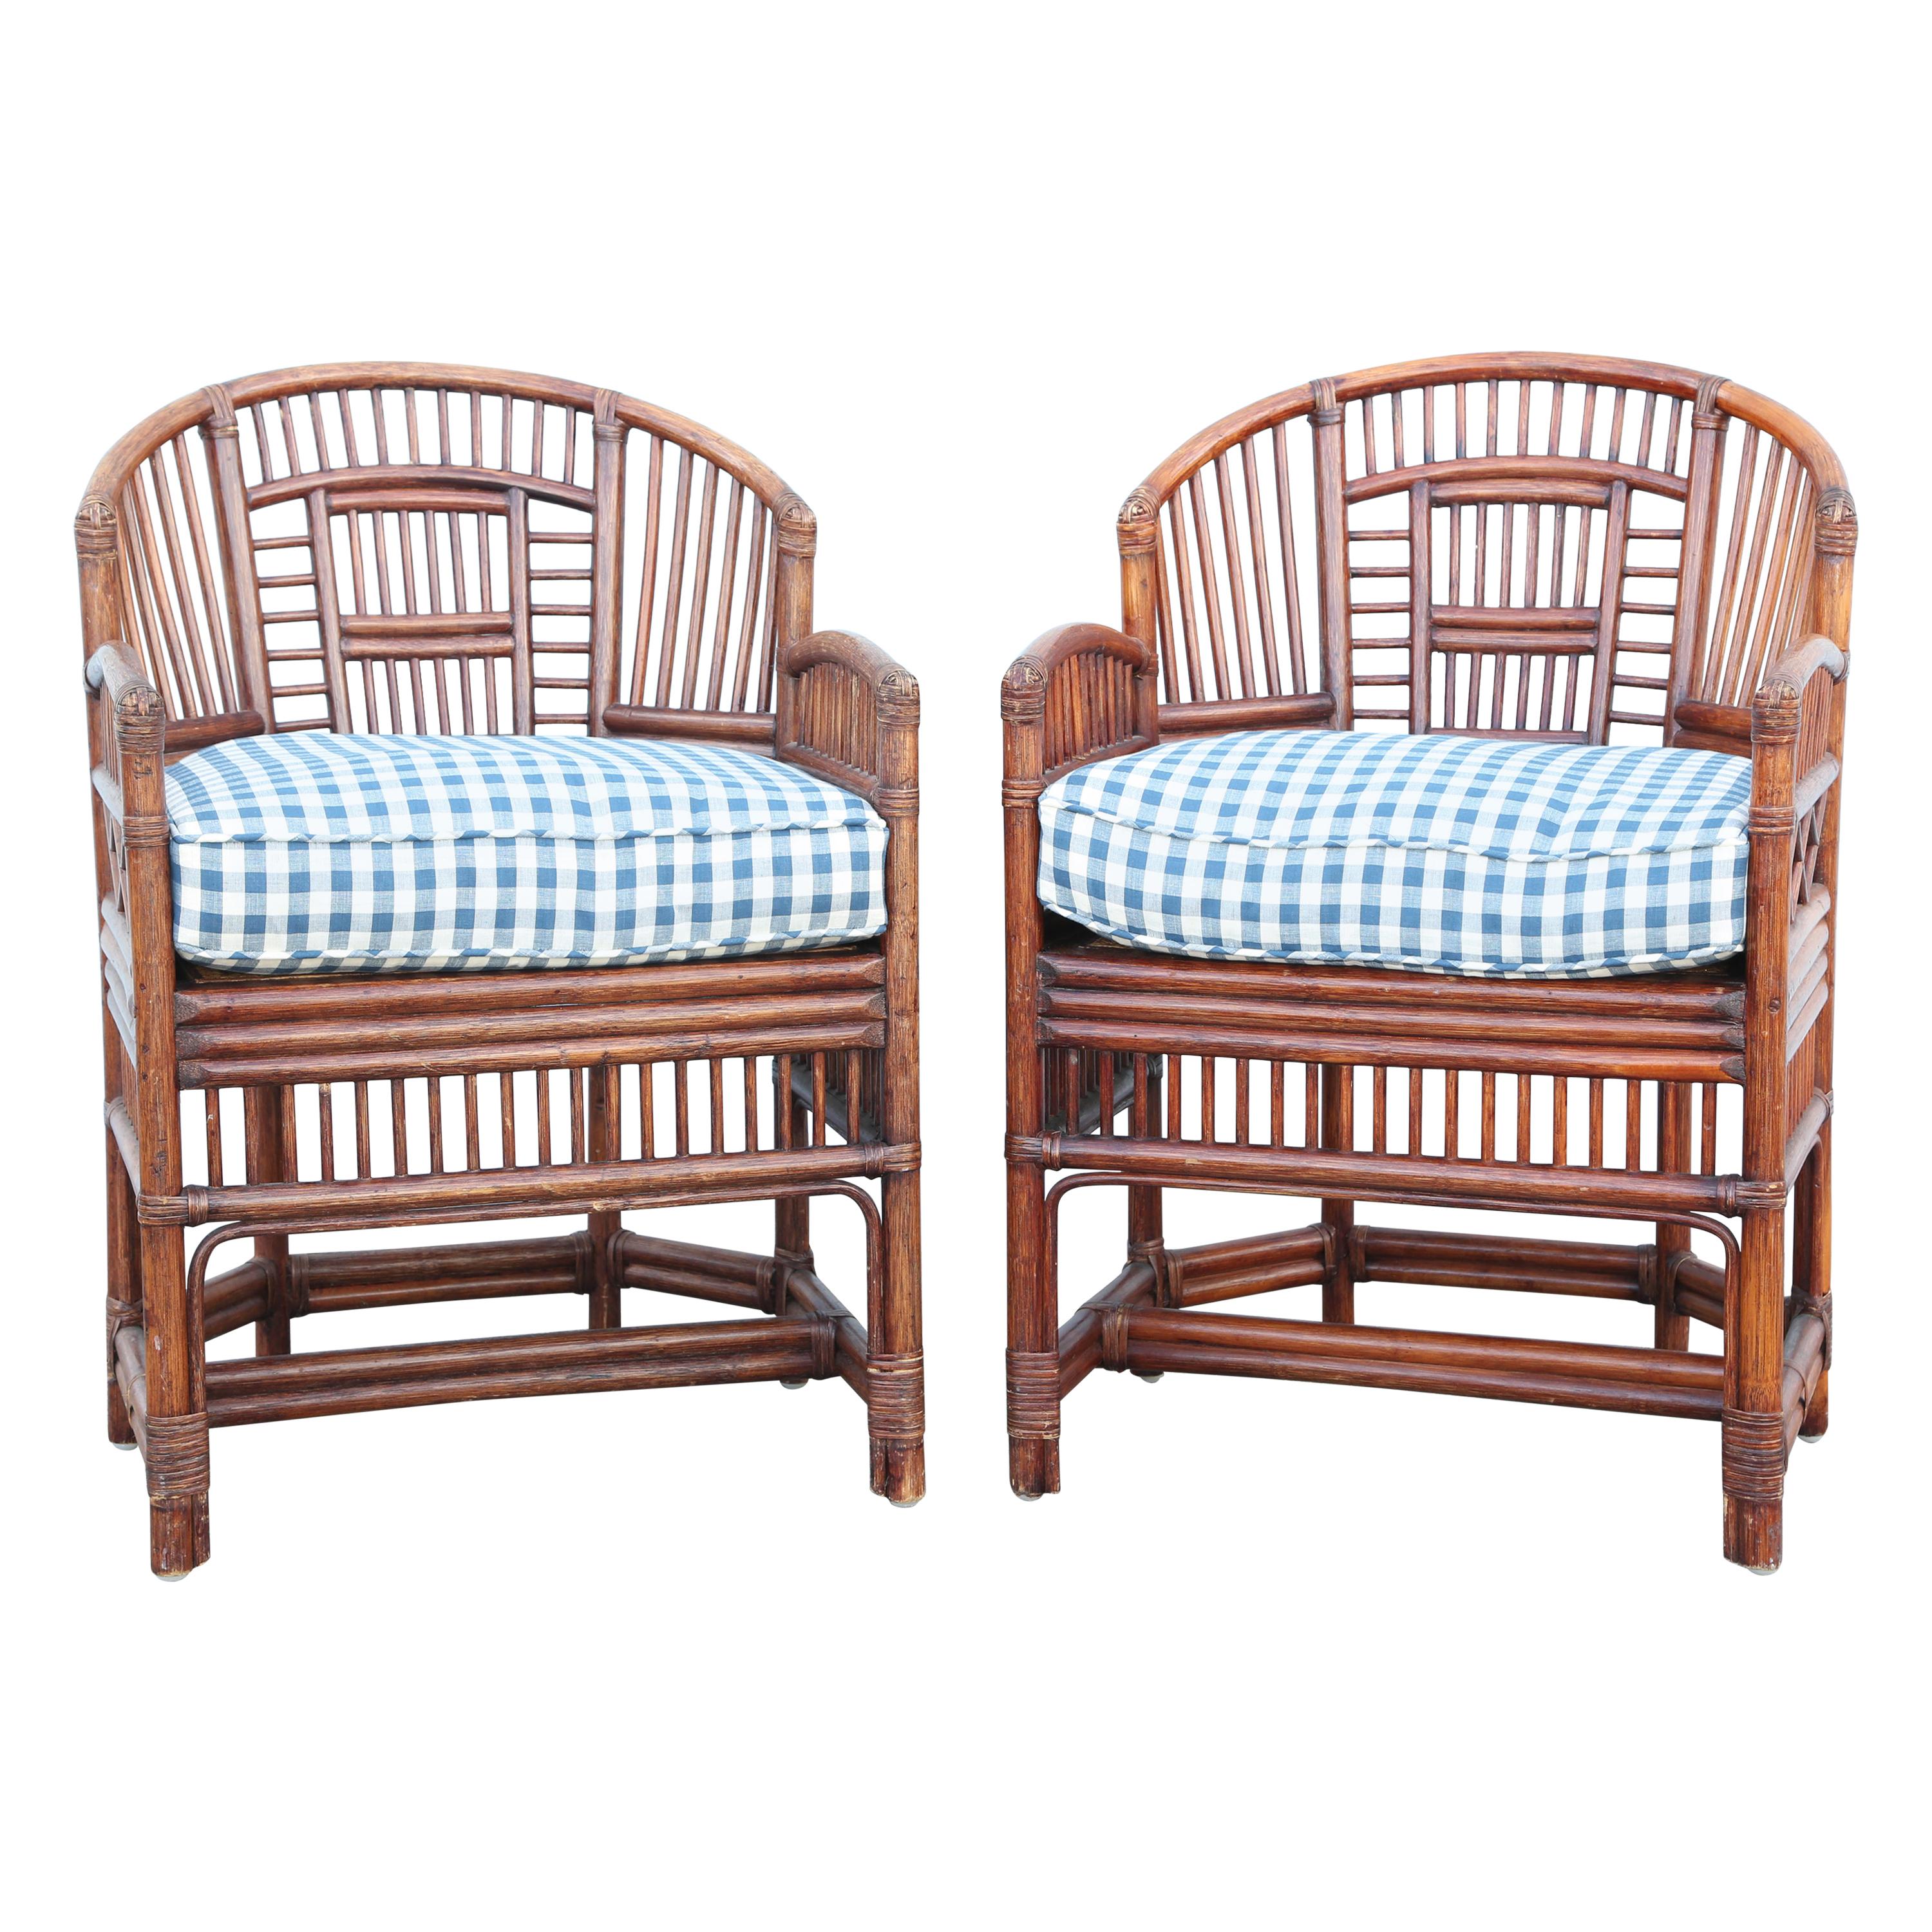 Vintage Pair of Bamboo Brighton Chairs